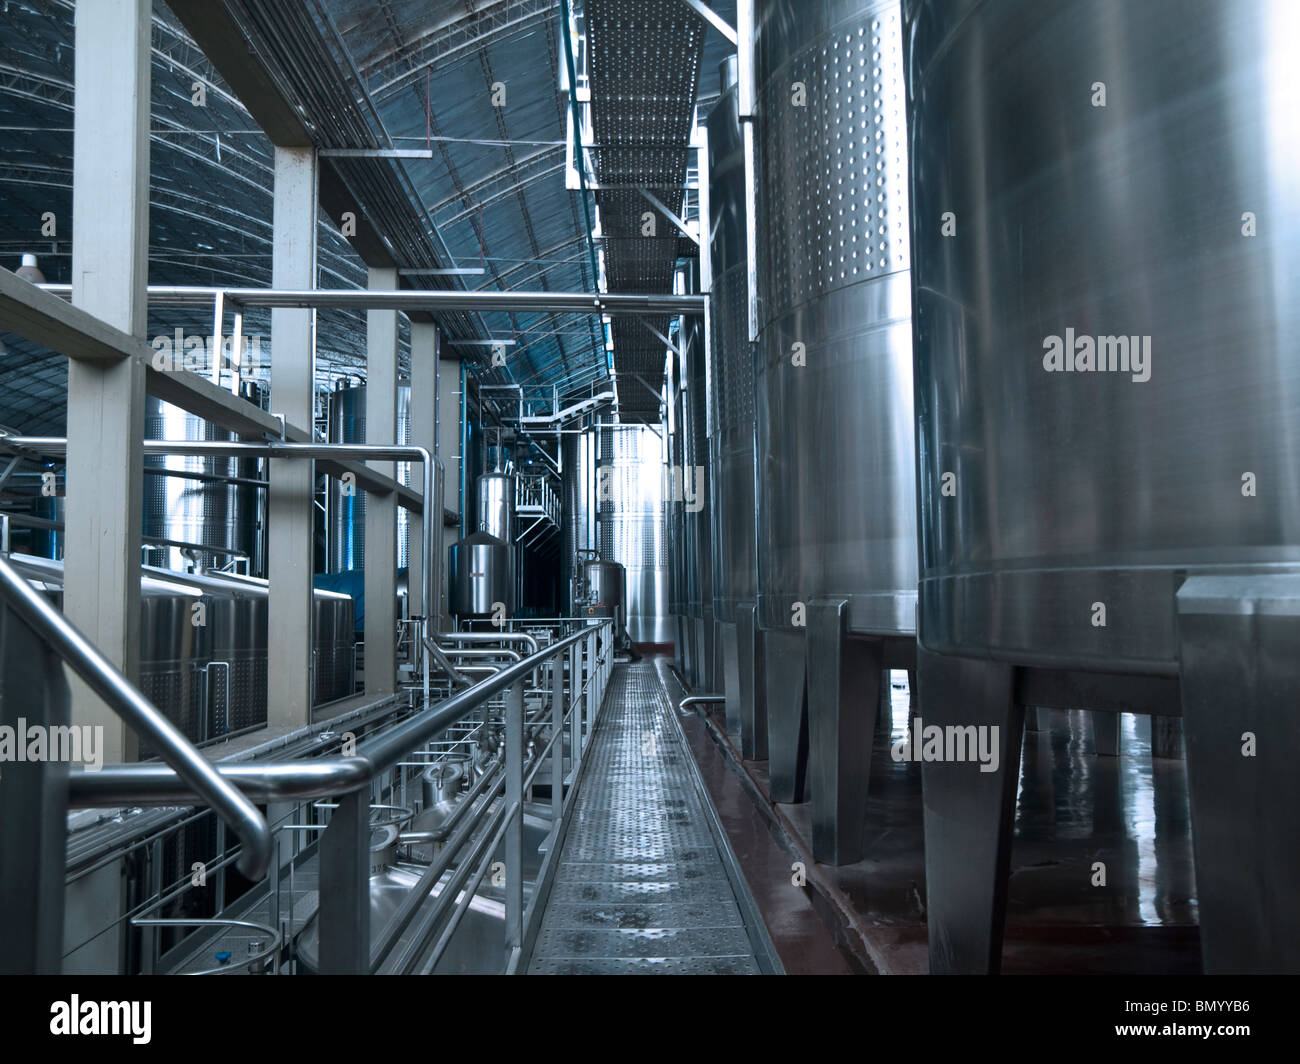 Stainless steel wine vats in a row inside the winery. Stock Photo